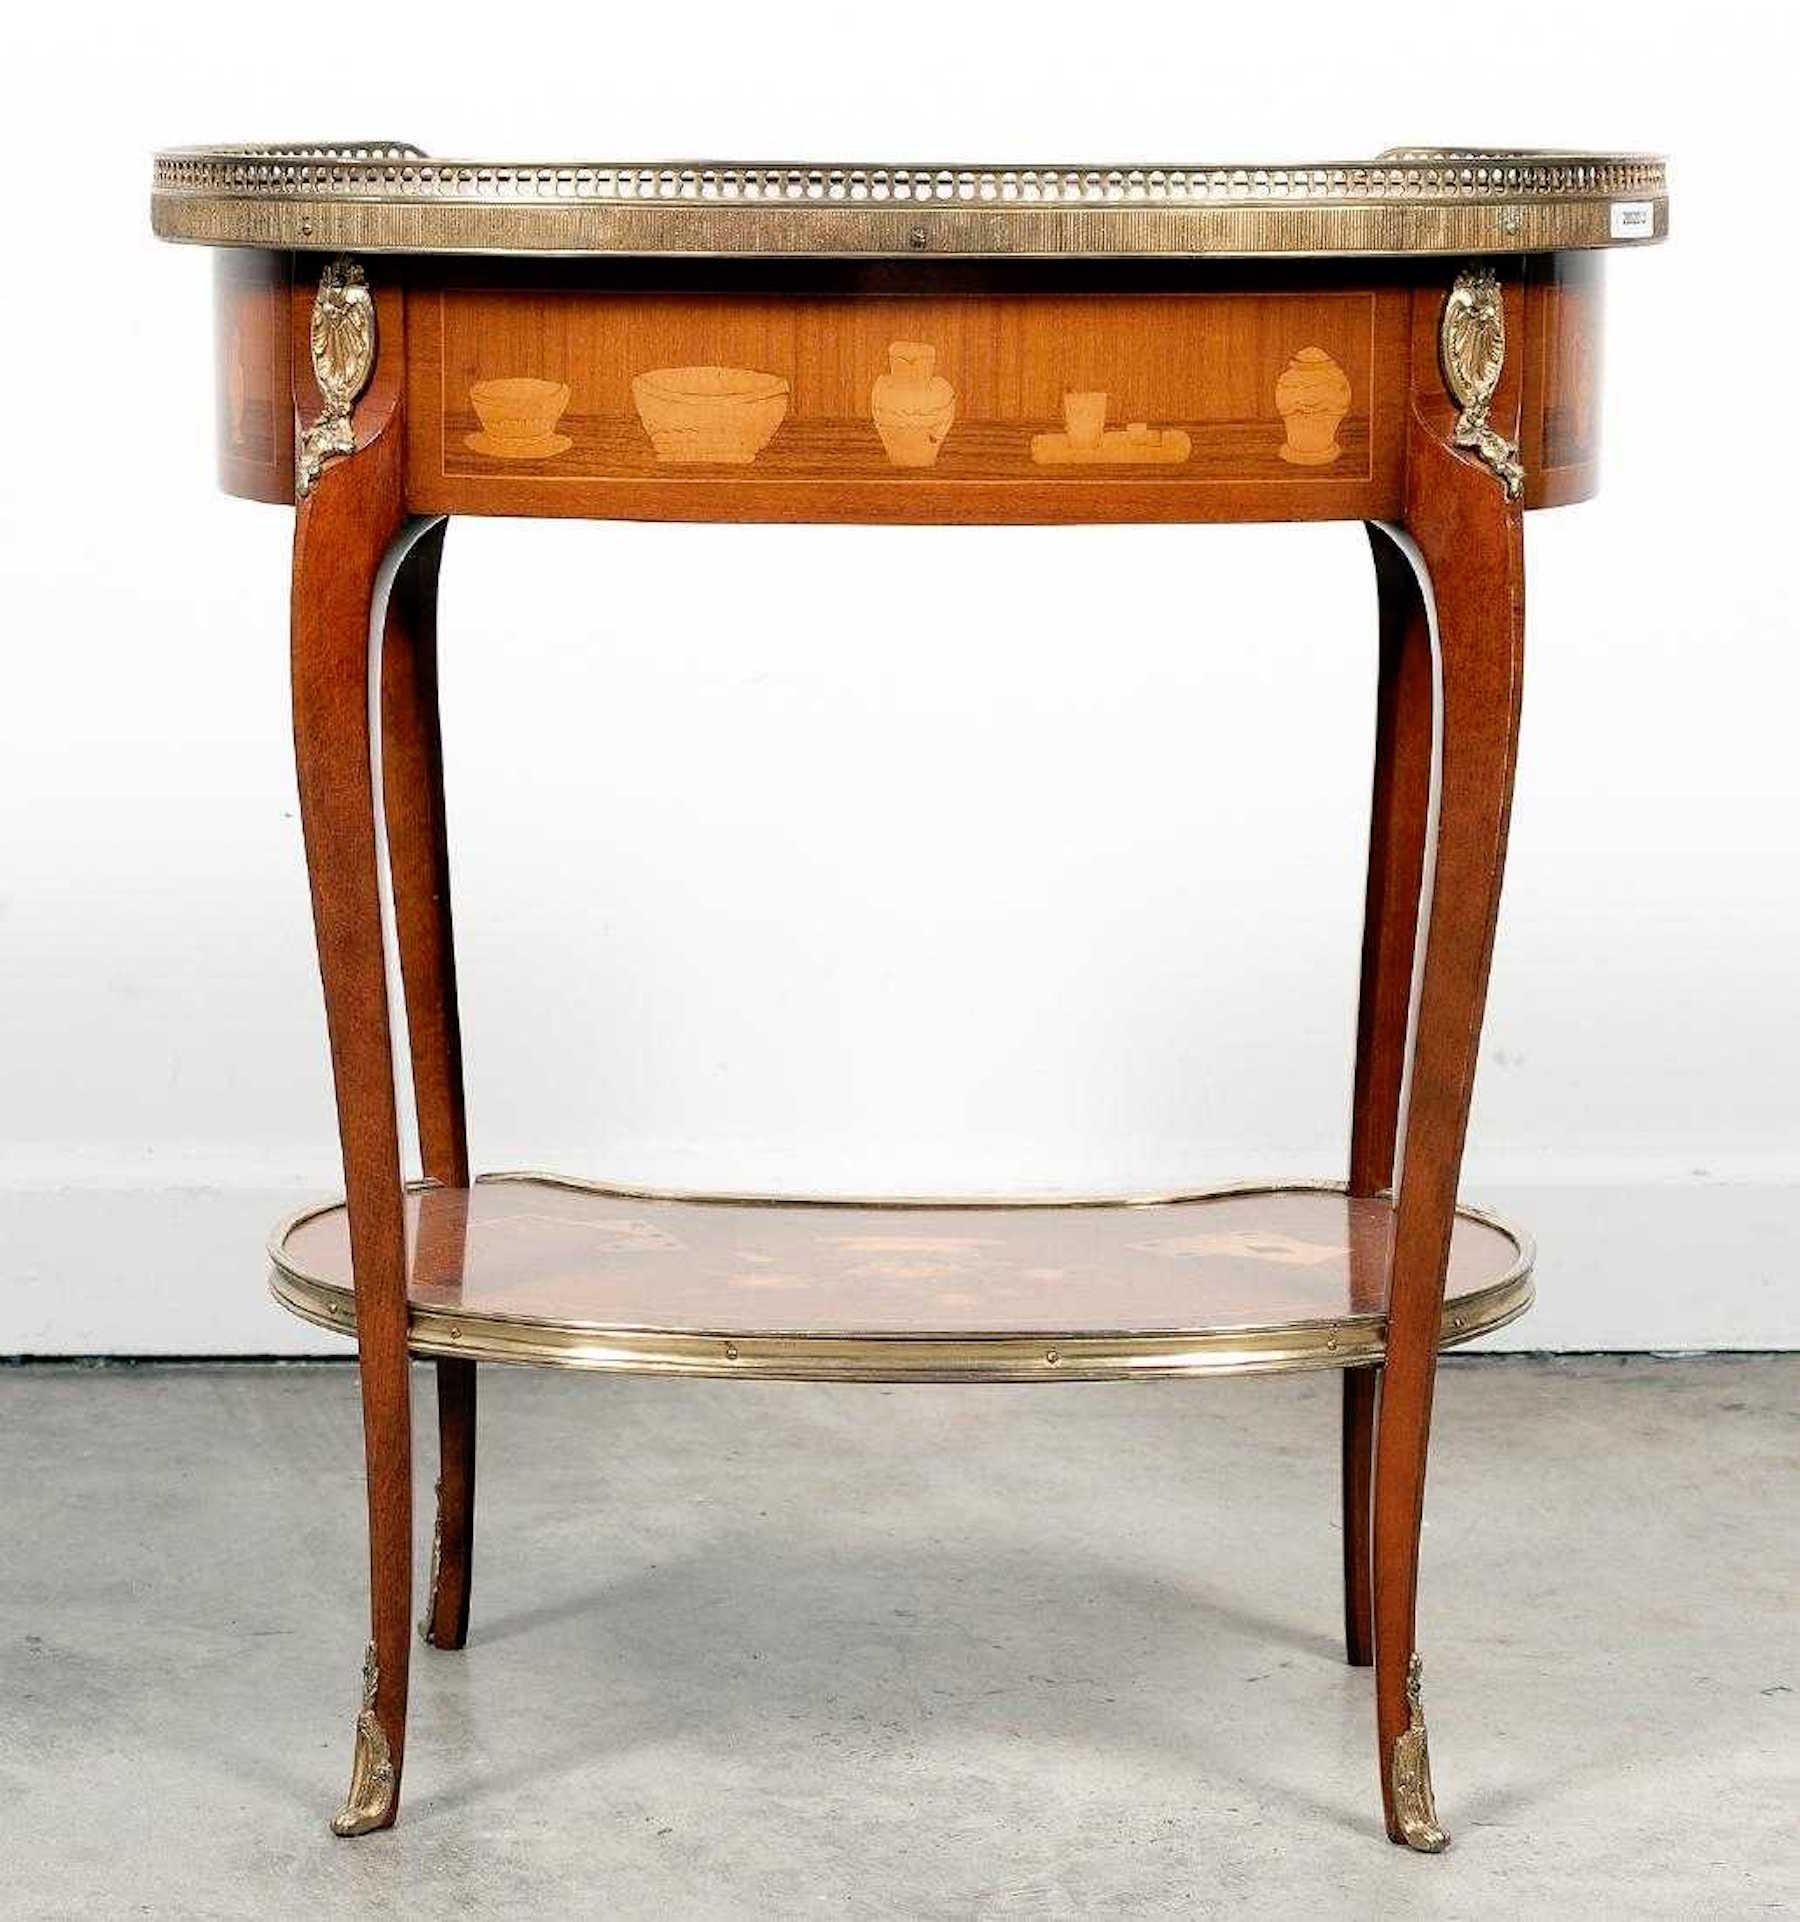 Louis XVI Style King and Tulip Wood Marquetry Side Table (Europäisch) im Angebot